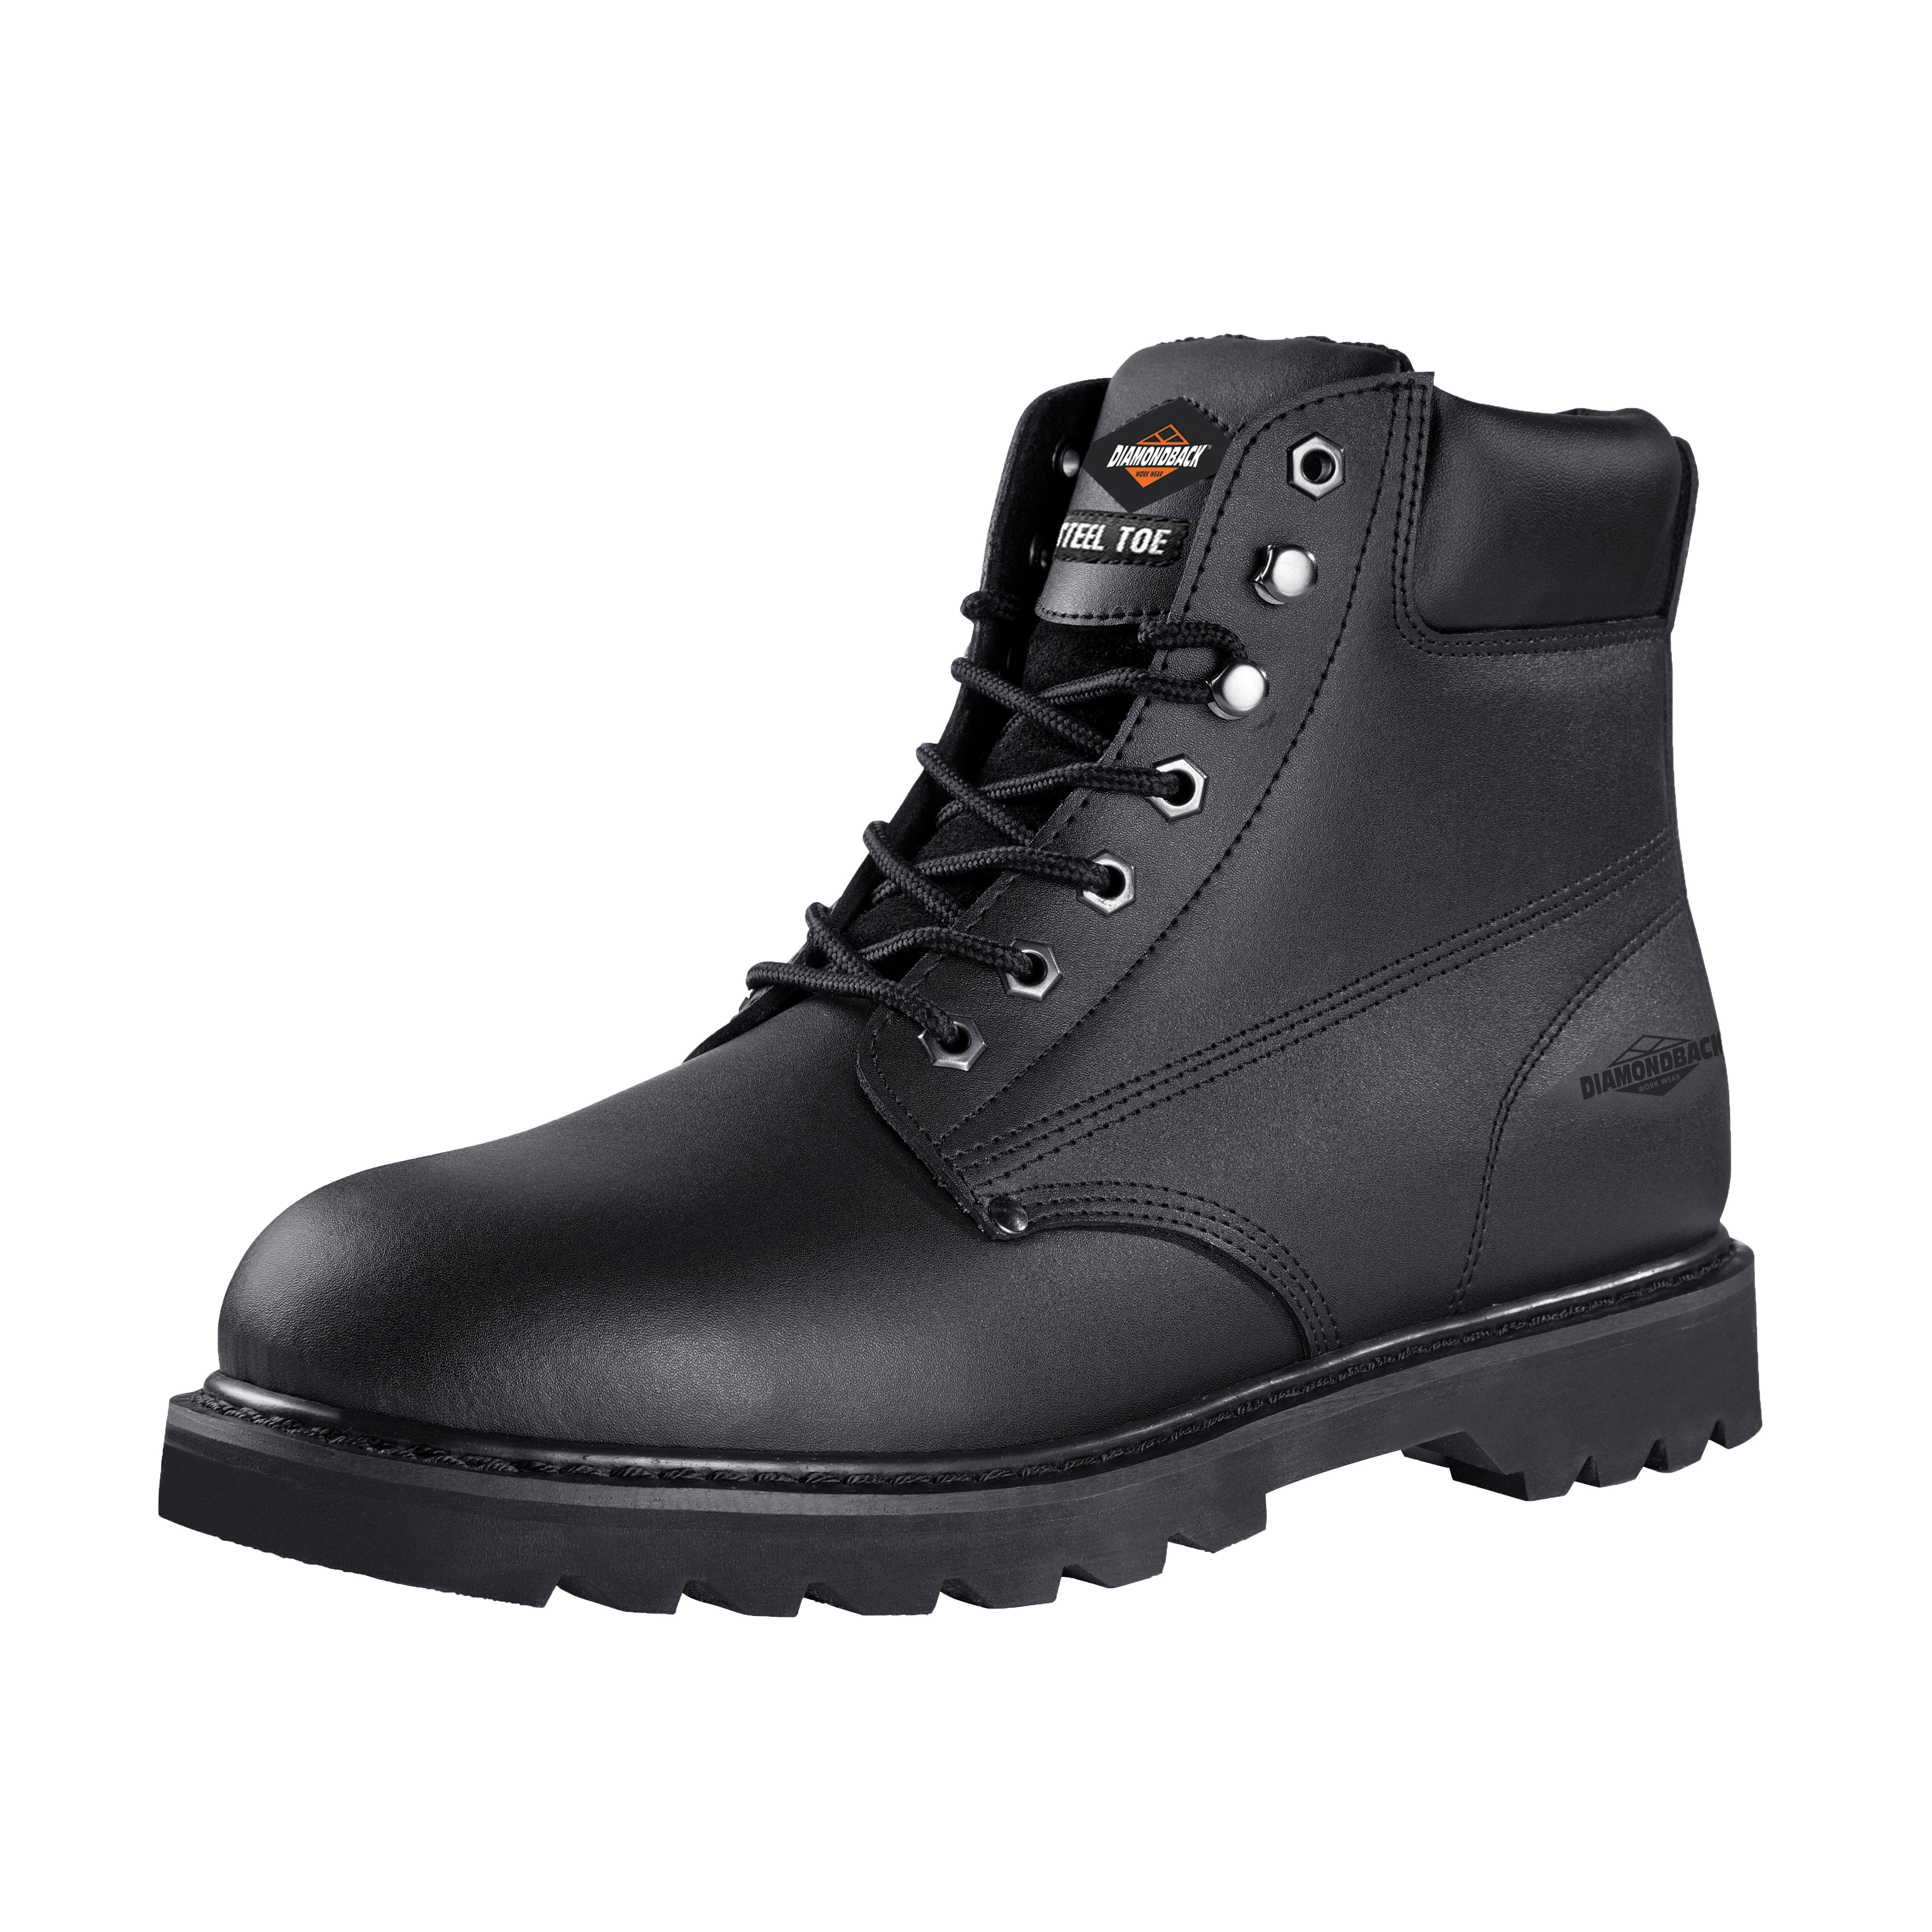 Work Boots, 9, Medium W, Black, Leather Upper, Lace-Up, Steel Toe, With Lining